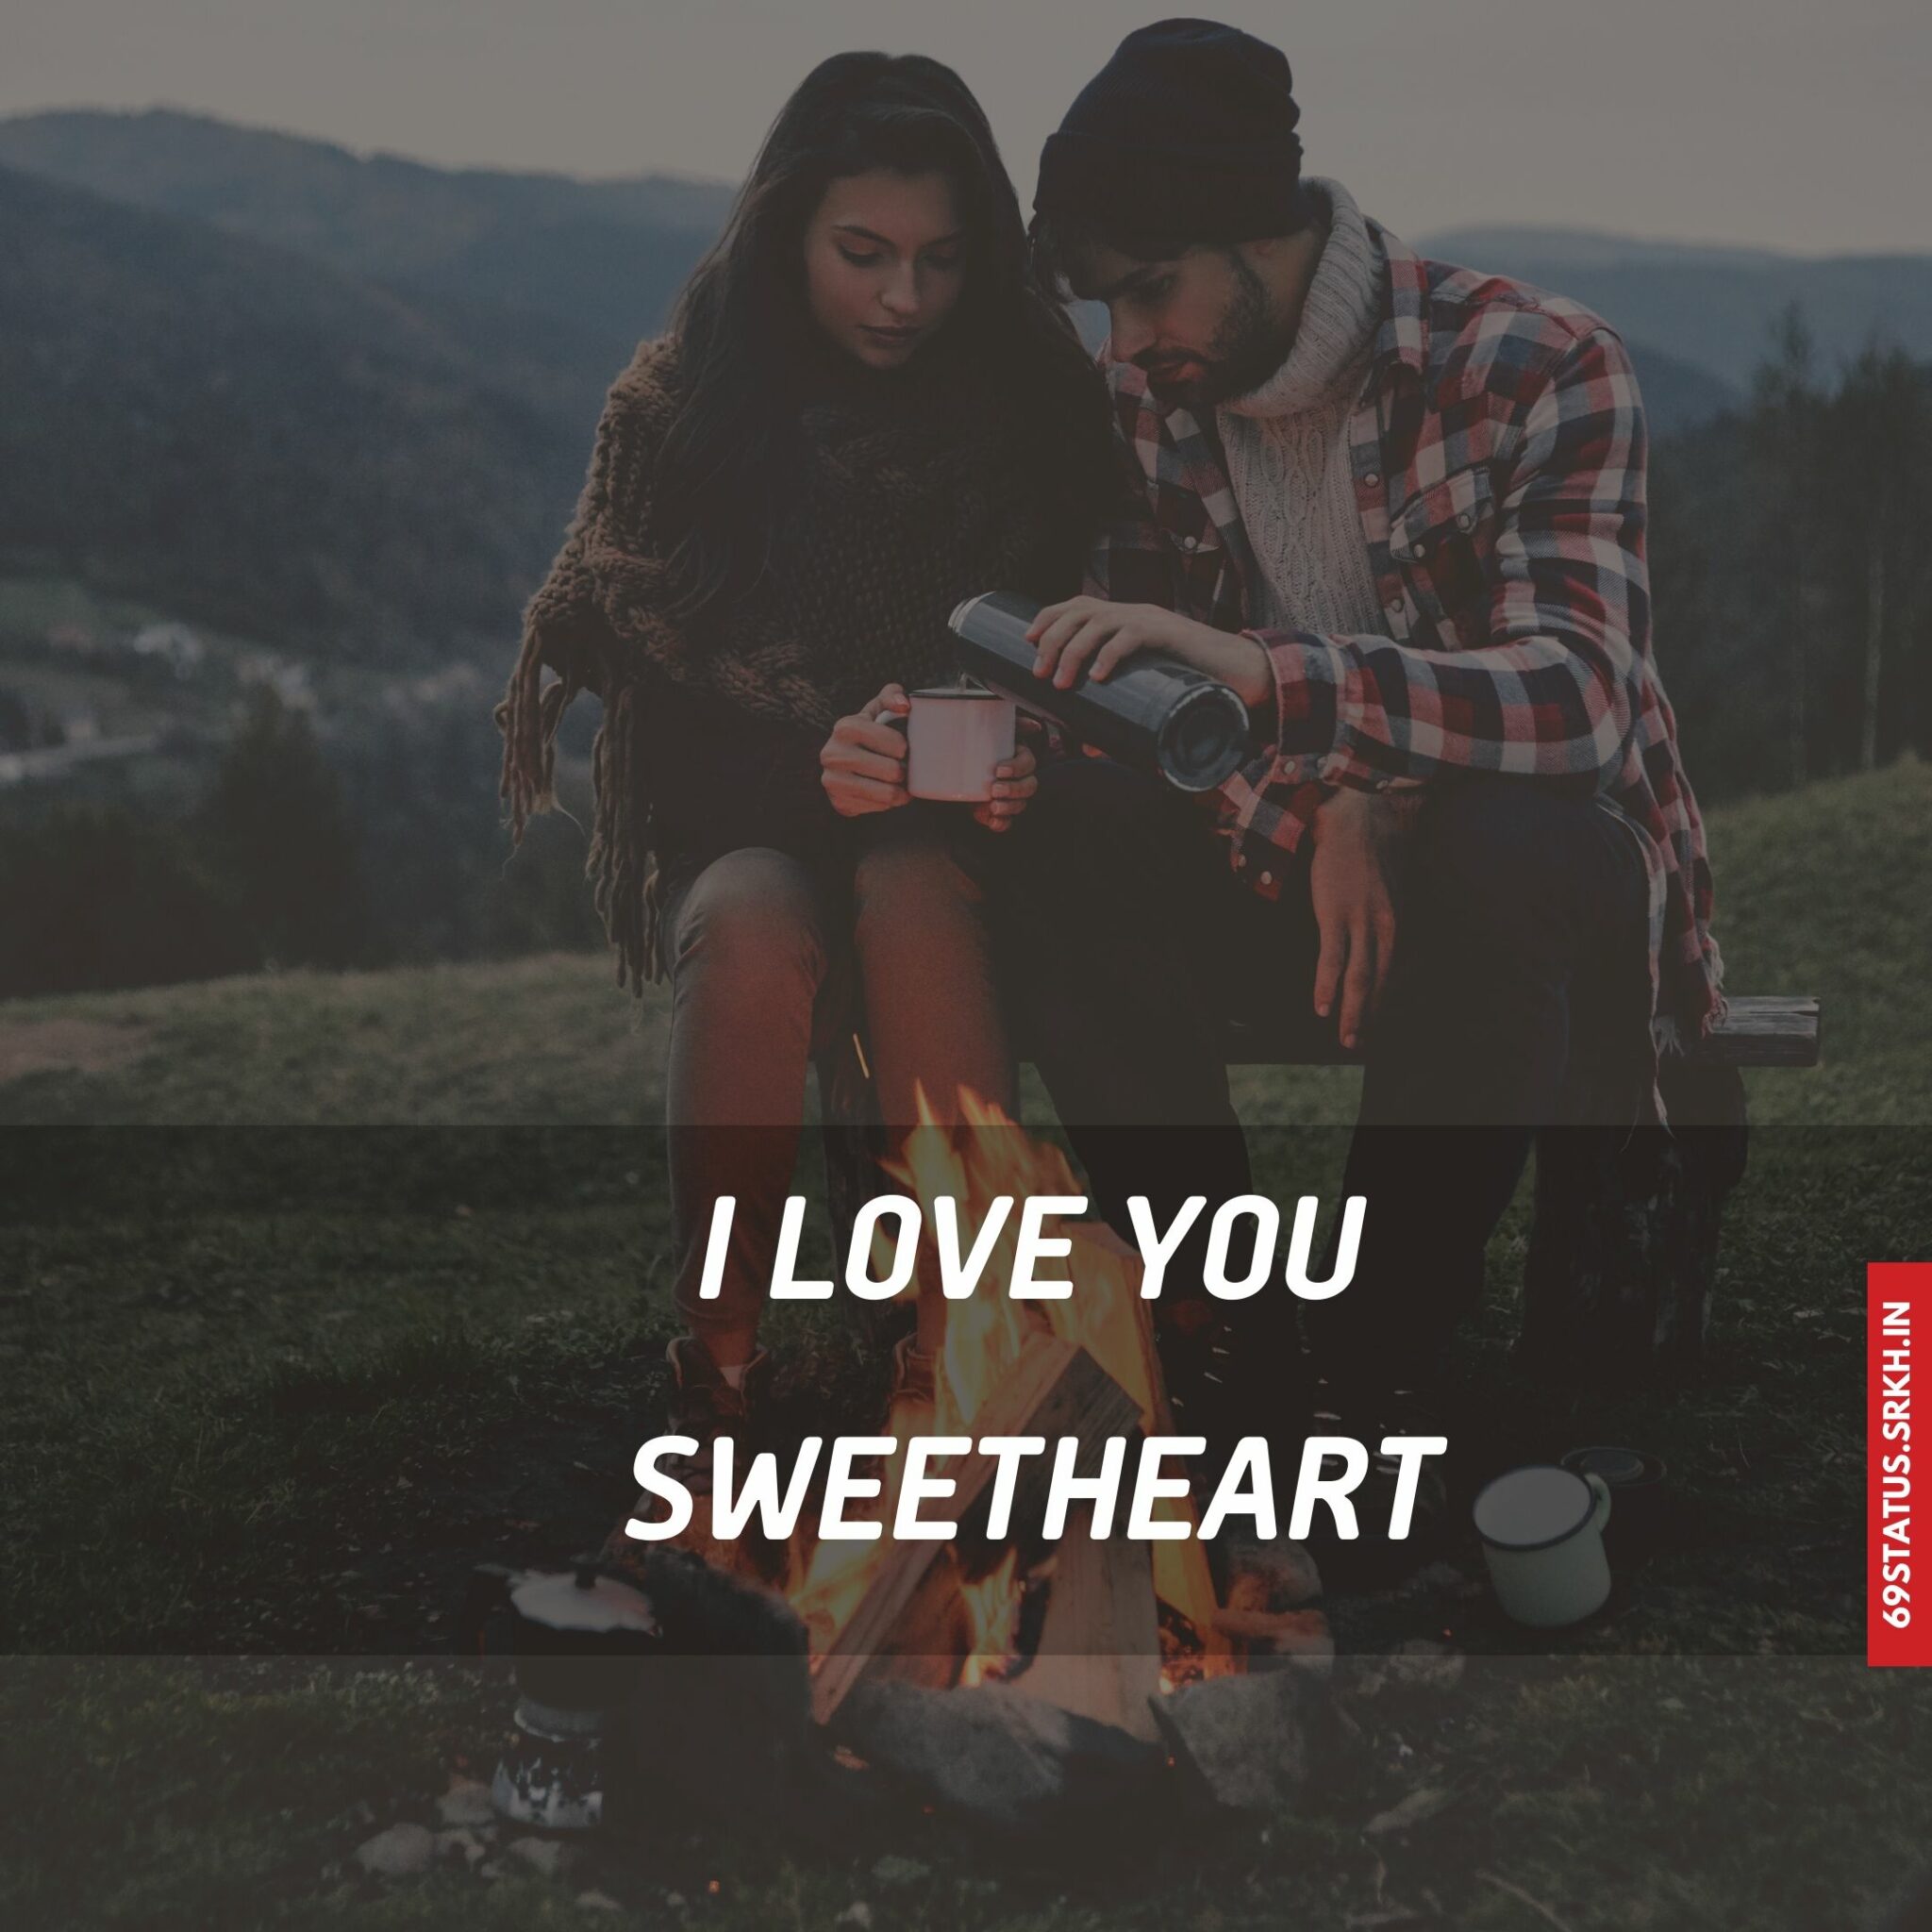 I Love You sweetheart images